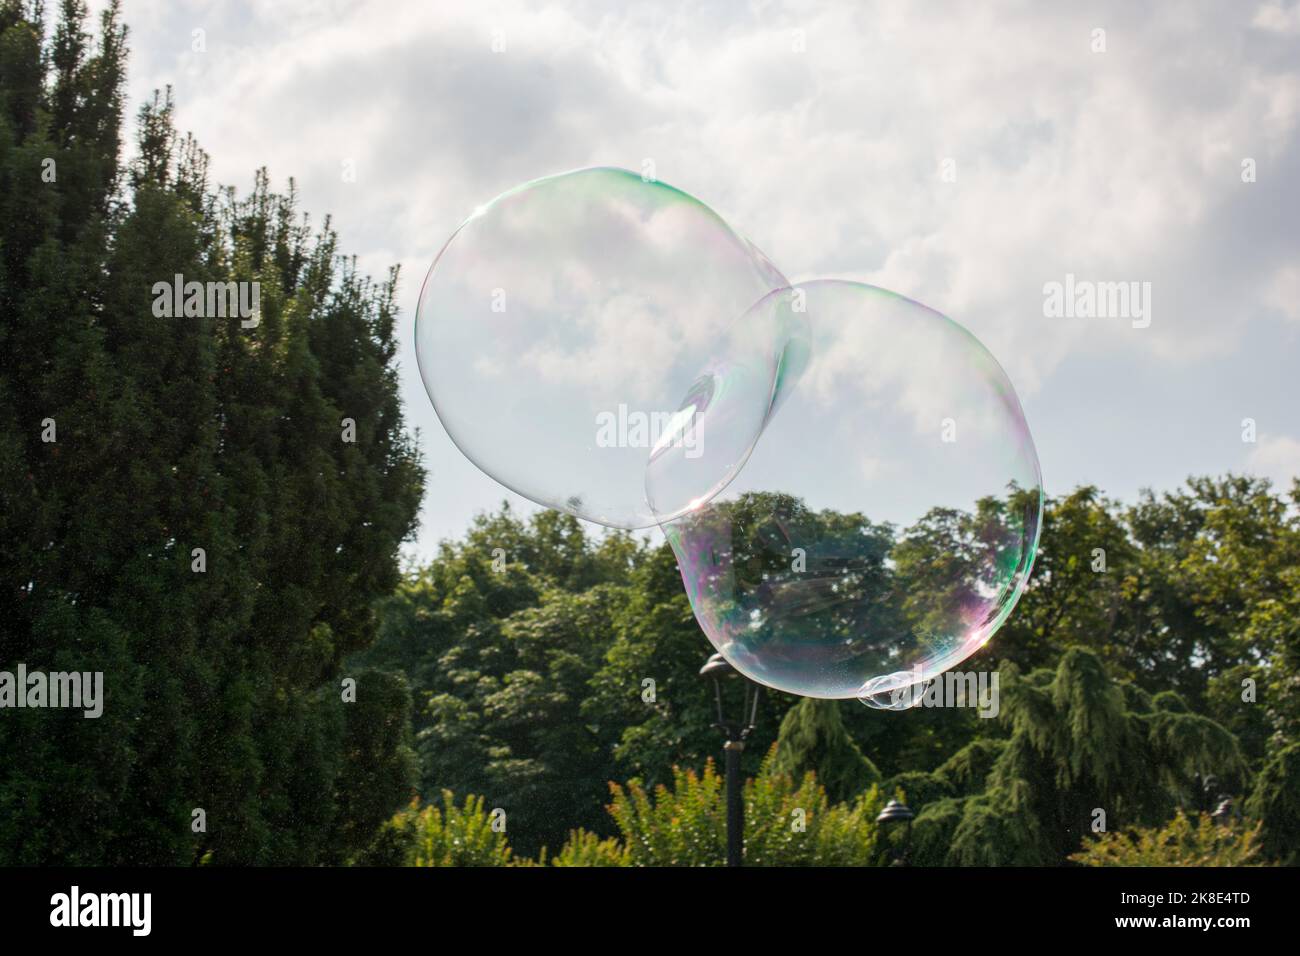 Blown soap bubbles float in air in view Stock Photo